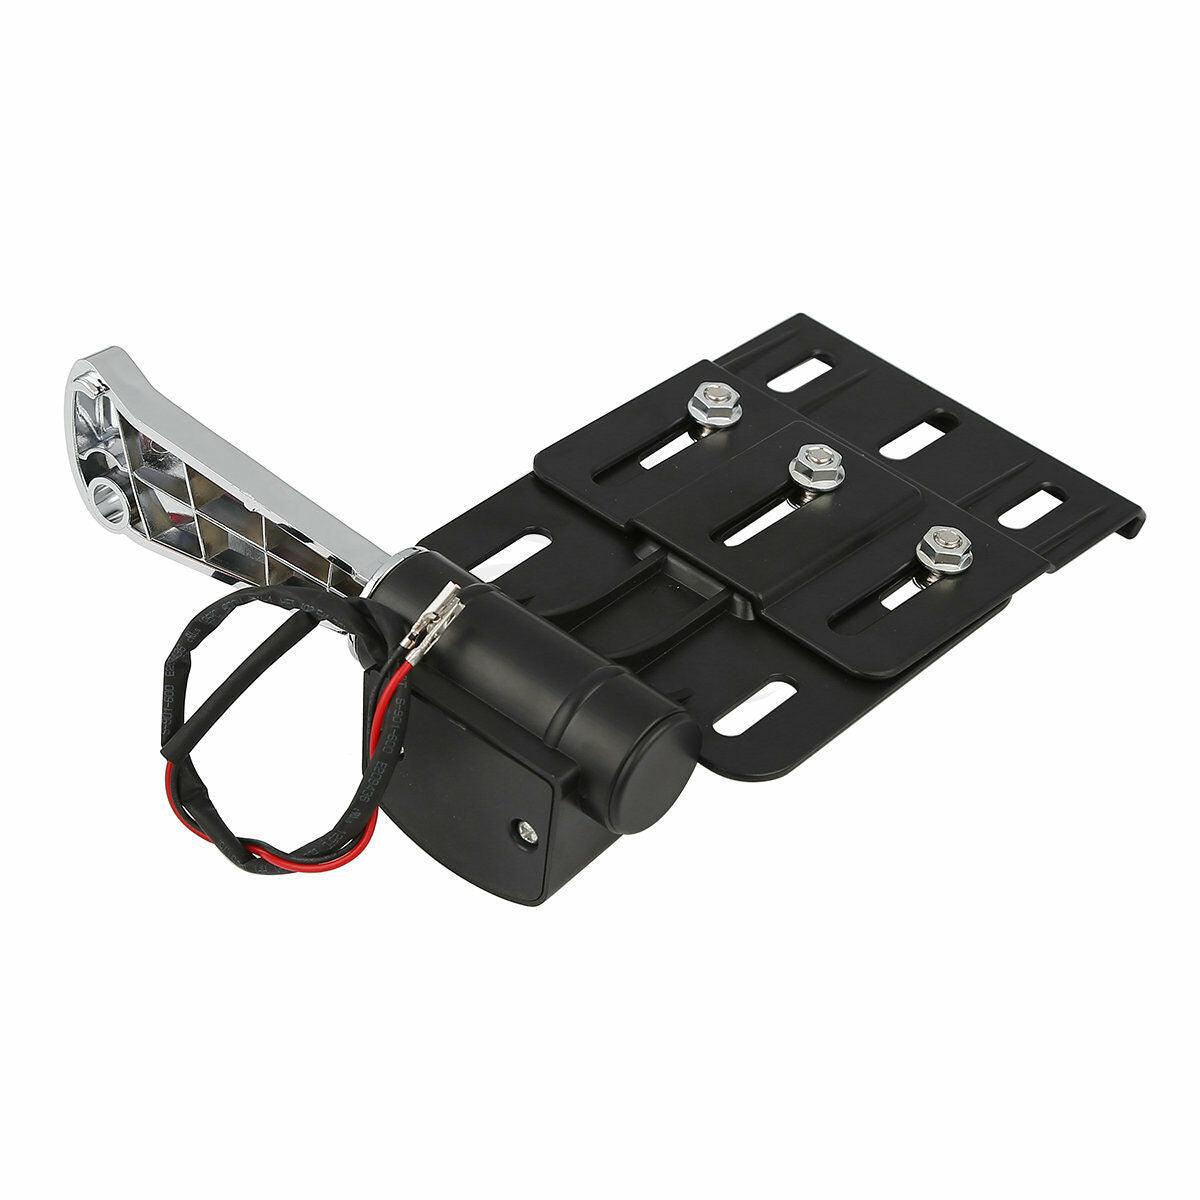 Black ABS LED Light Side Mount License Plate Fit For Harley Sportster 04-16 2015 - Moto Life Products